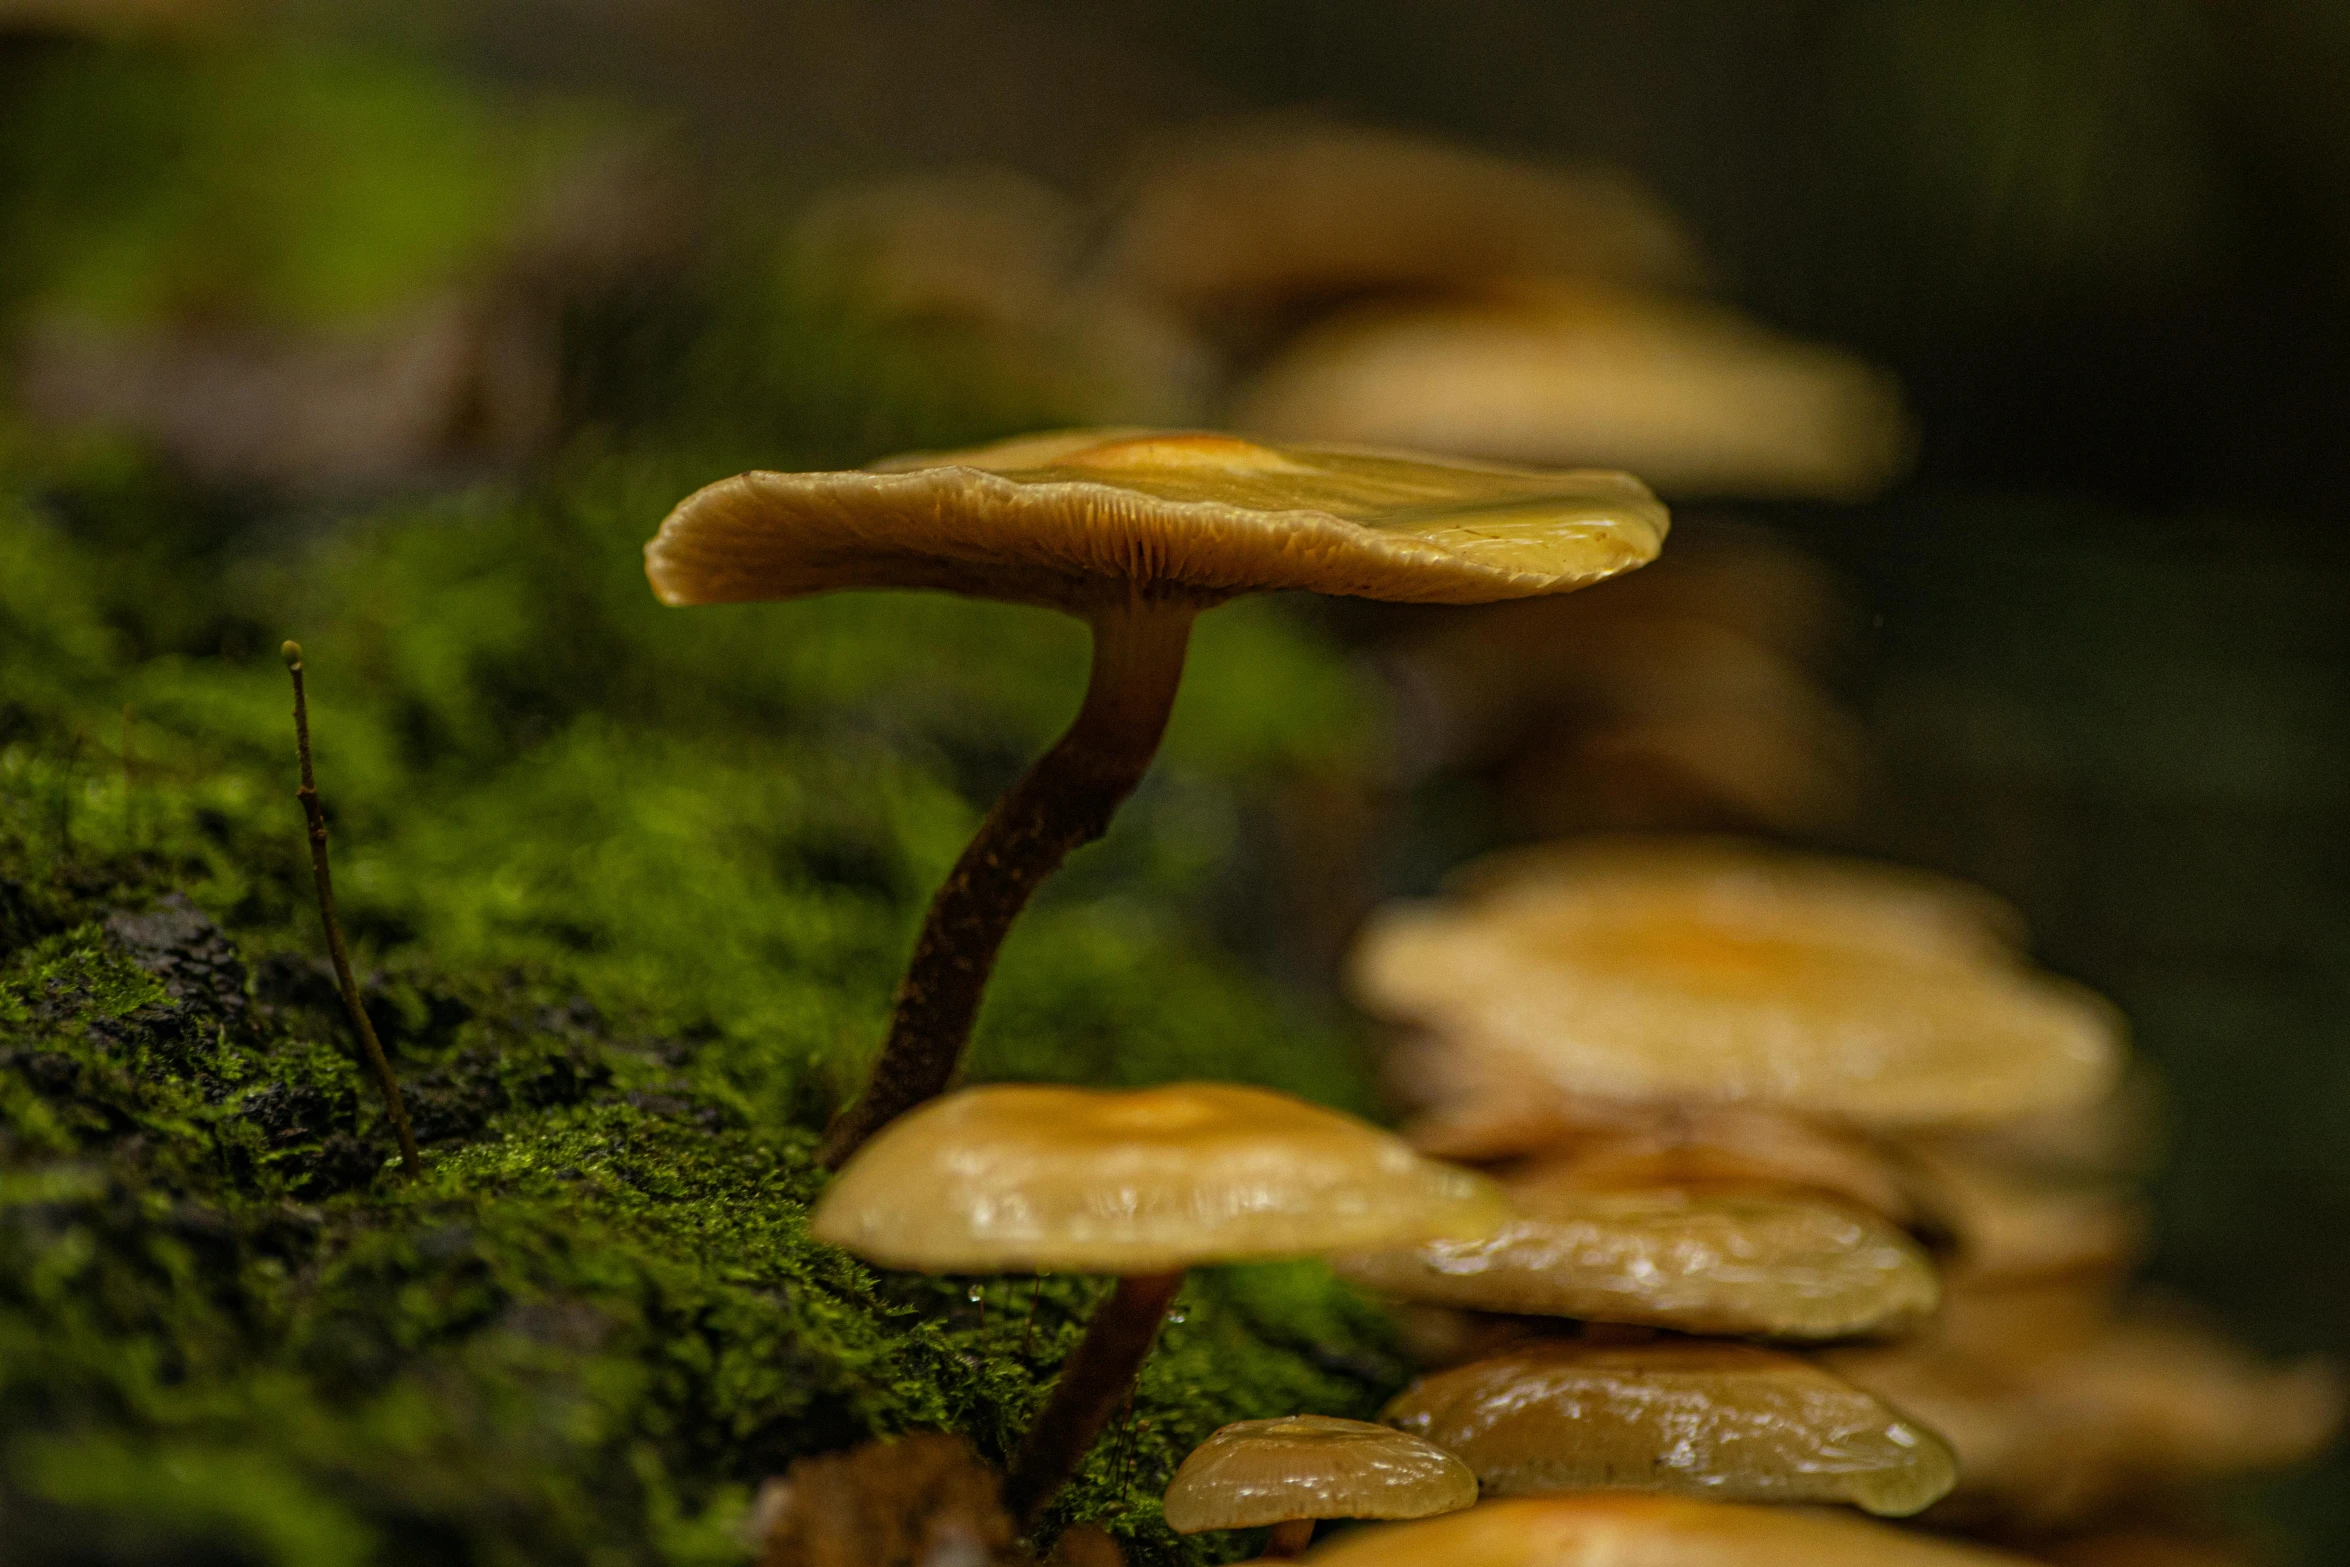 some very pretty mushrooms growing on a forest floor